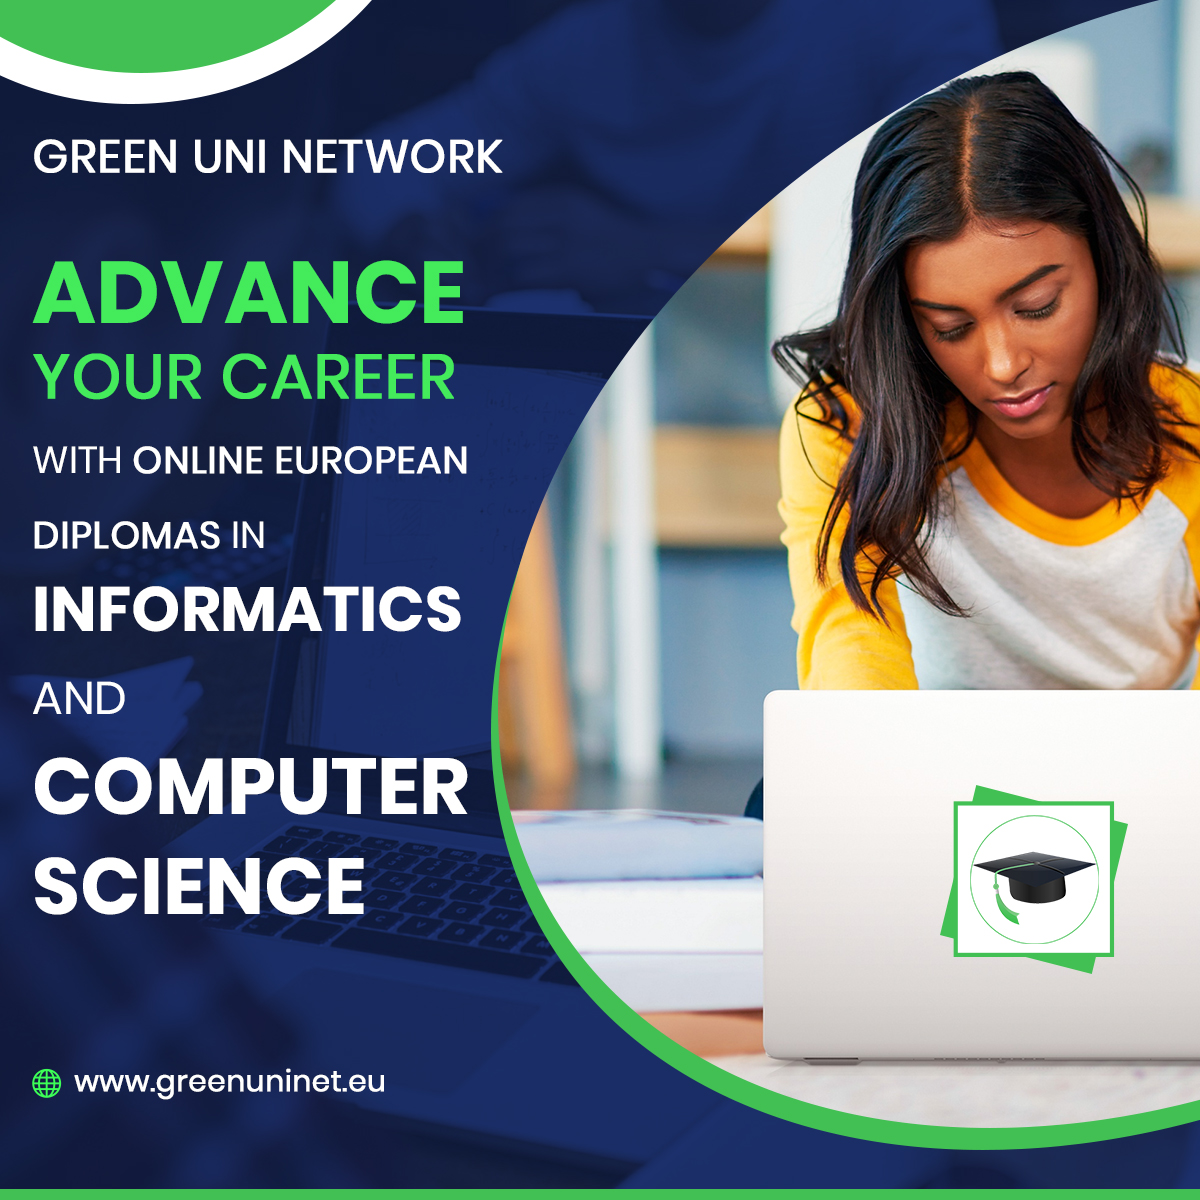 Advance Your #Career with Online #EuropeanDiplomas in #Informatics and #ComputerScience

greenuninet.eu
.
.
.
#GreenUniNetwork #EuropeanEducation #OnlineEducation #DistanceLearning #elearning #Crypto #Cryptocurrency #GreenyToken